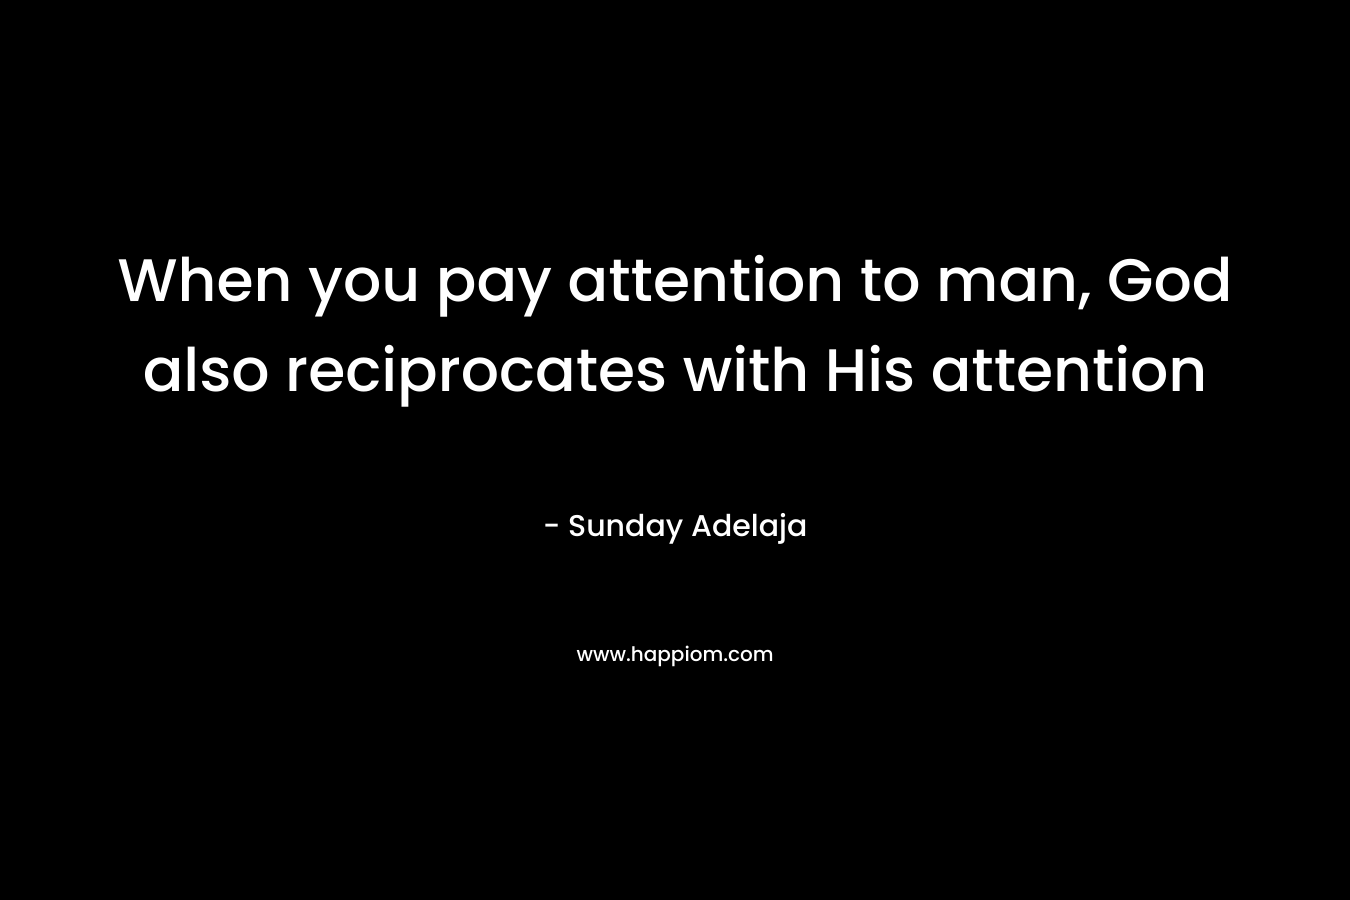 When you pay attention to man, God also reciprocates with His attention